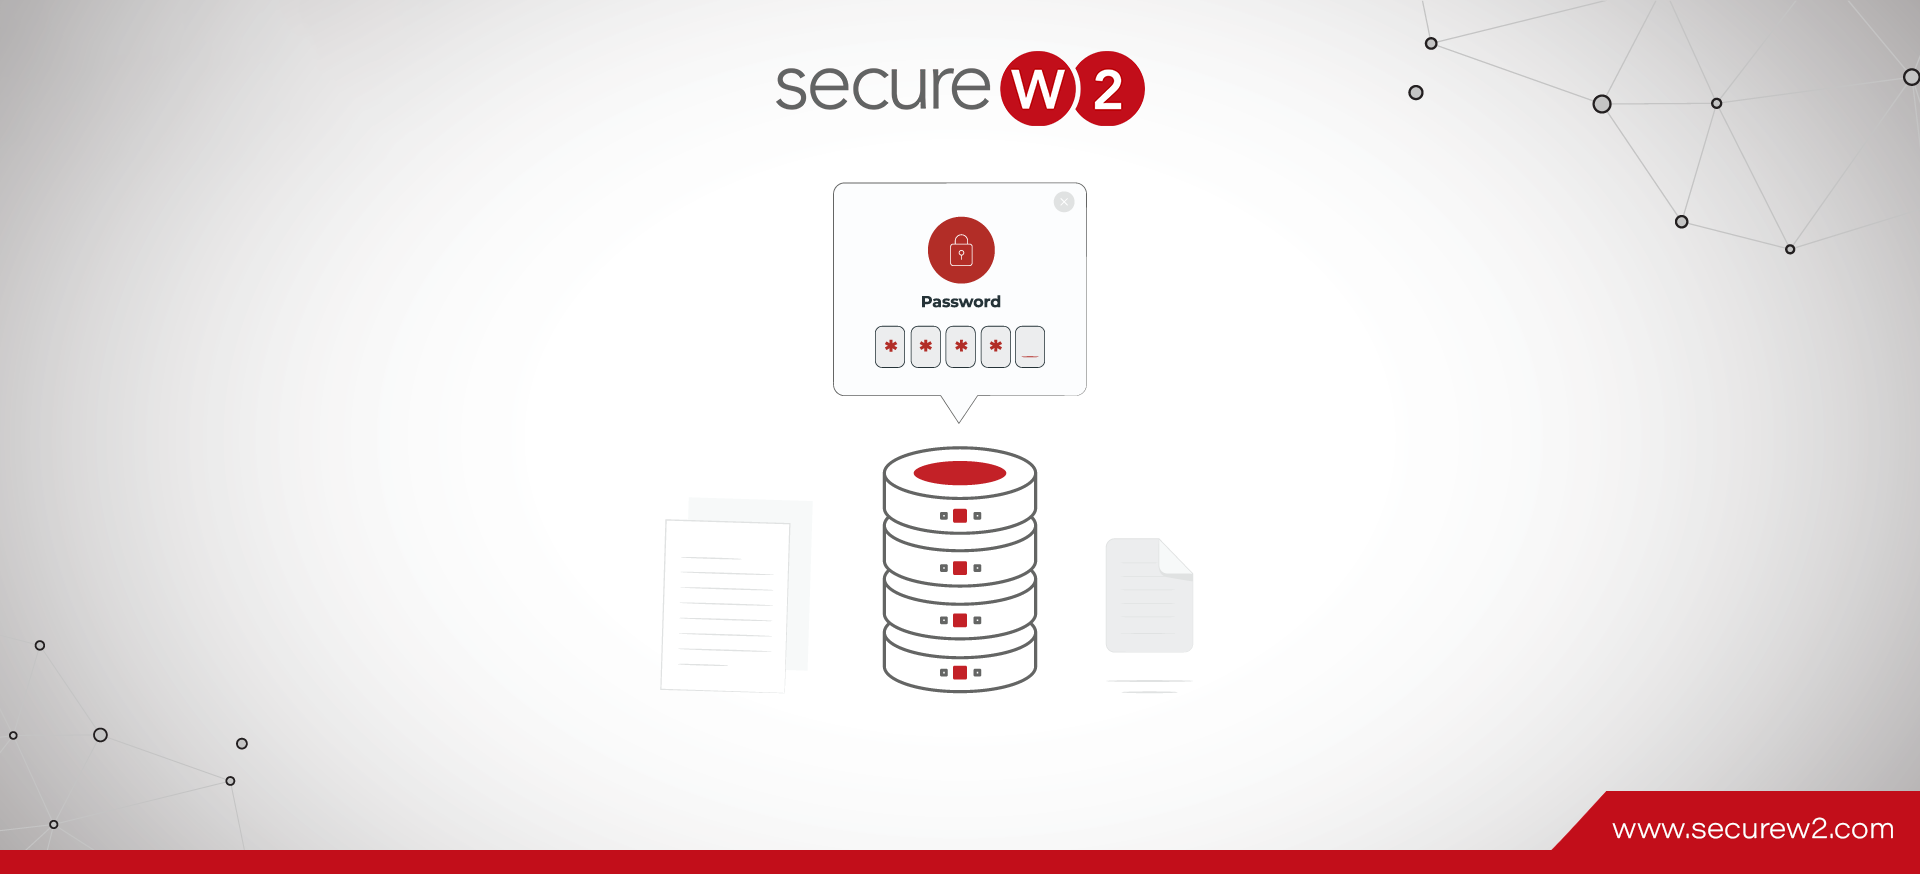 Trend Micro Research on X: Scenario 2: If the user is not logged